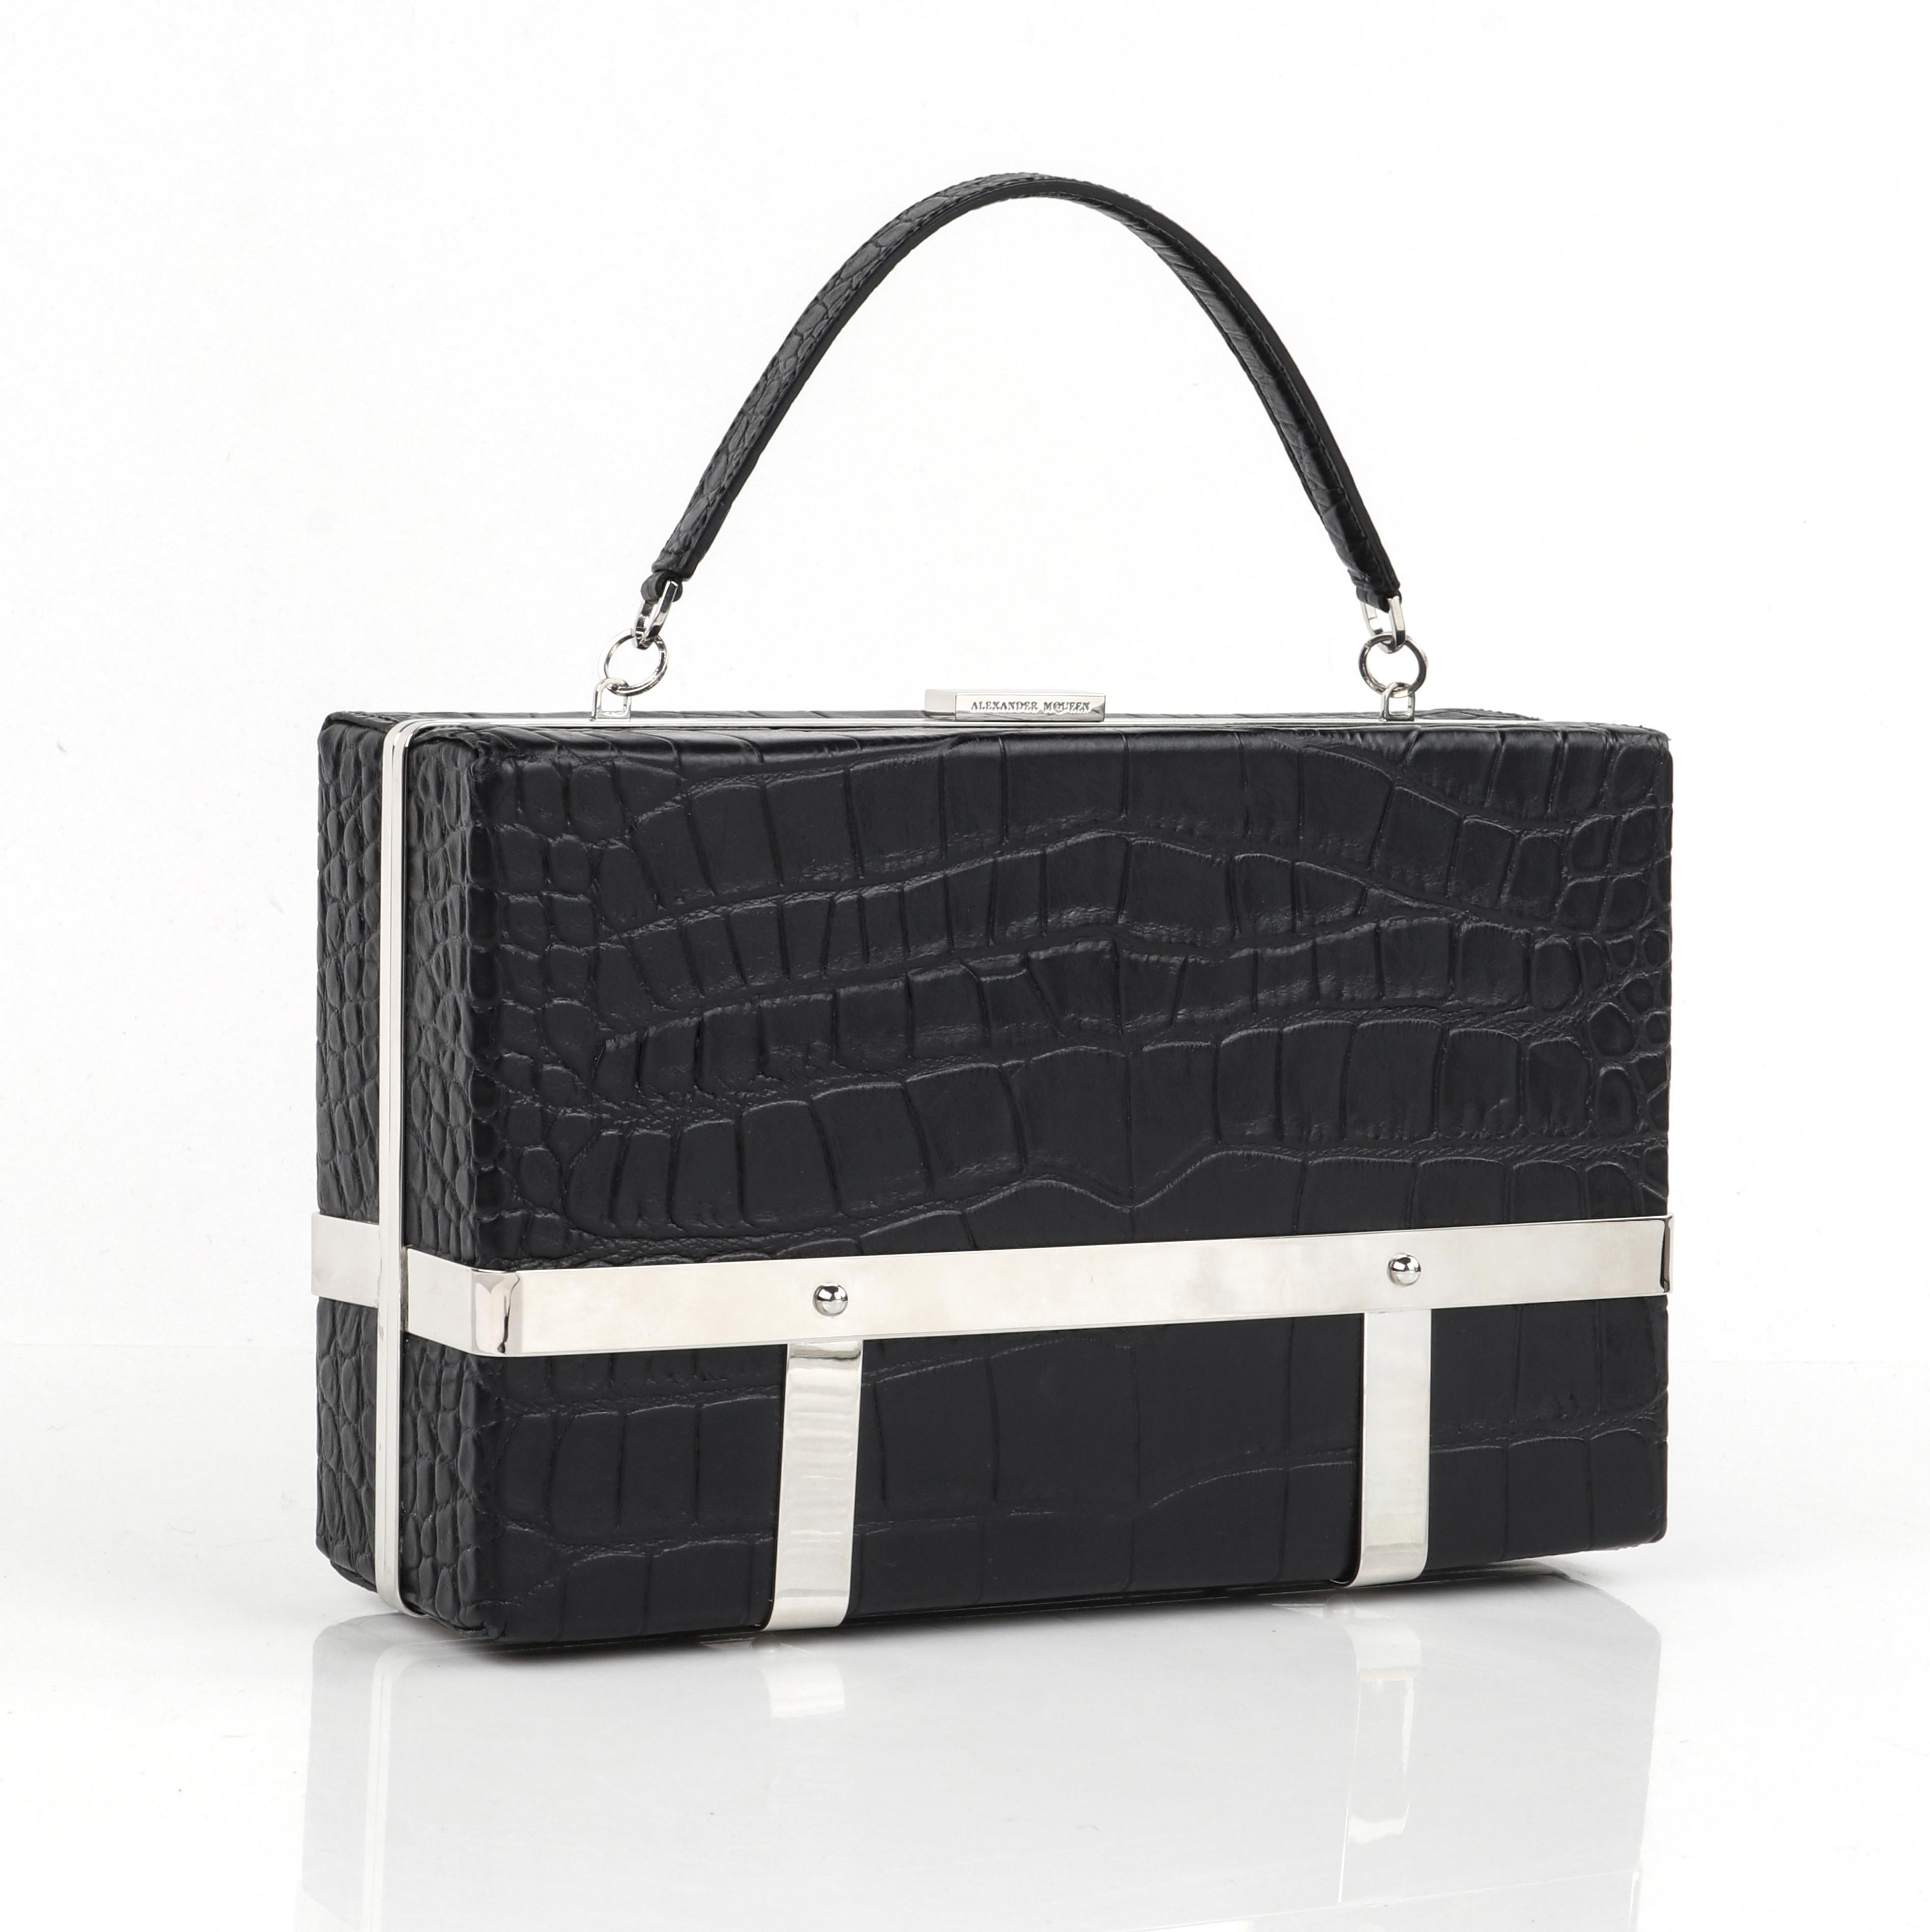 ALEXANDER McQUEEN Pre-Fall 2015 Black Croc Embossed Leather Metal Cage Box Handbag

Brand / Manufacturer: Alexander McQueen
Collection: Pre-Fall 2015
Designer: Alexander McQueen
Style: Box Handbag
Color(s): Shades of black, silver
Lined: